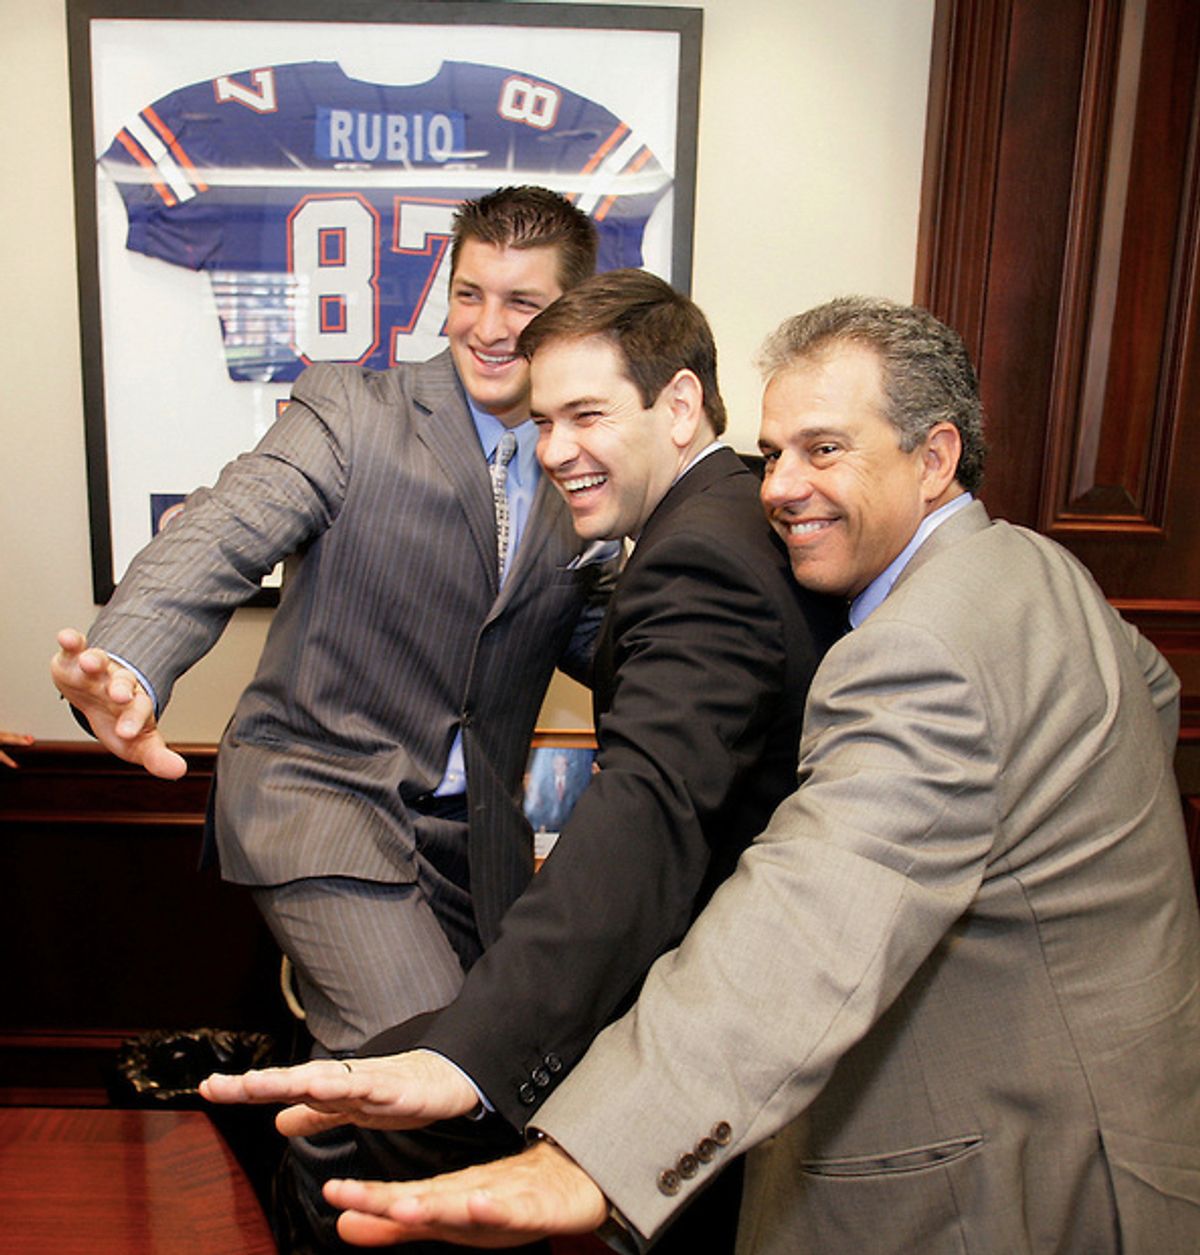 University of Florida quarterback and 2007 Heisman Trophy winner Tim Tebow (L), Speaker of the Florida House of Represenatives Marco Rubio, (C) and University of Florida board of trustee member Carlos Alfonso strike a Heisman pose in Rubio's office at the Florida State Capitol April 24, 2008.  (Mark Wallheiser/TallahasseeStock.com)